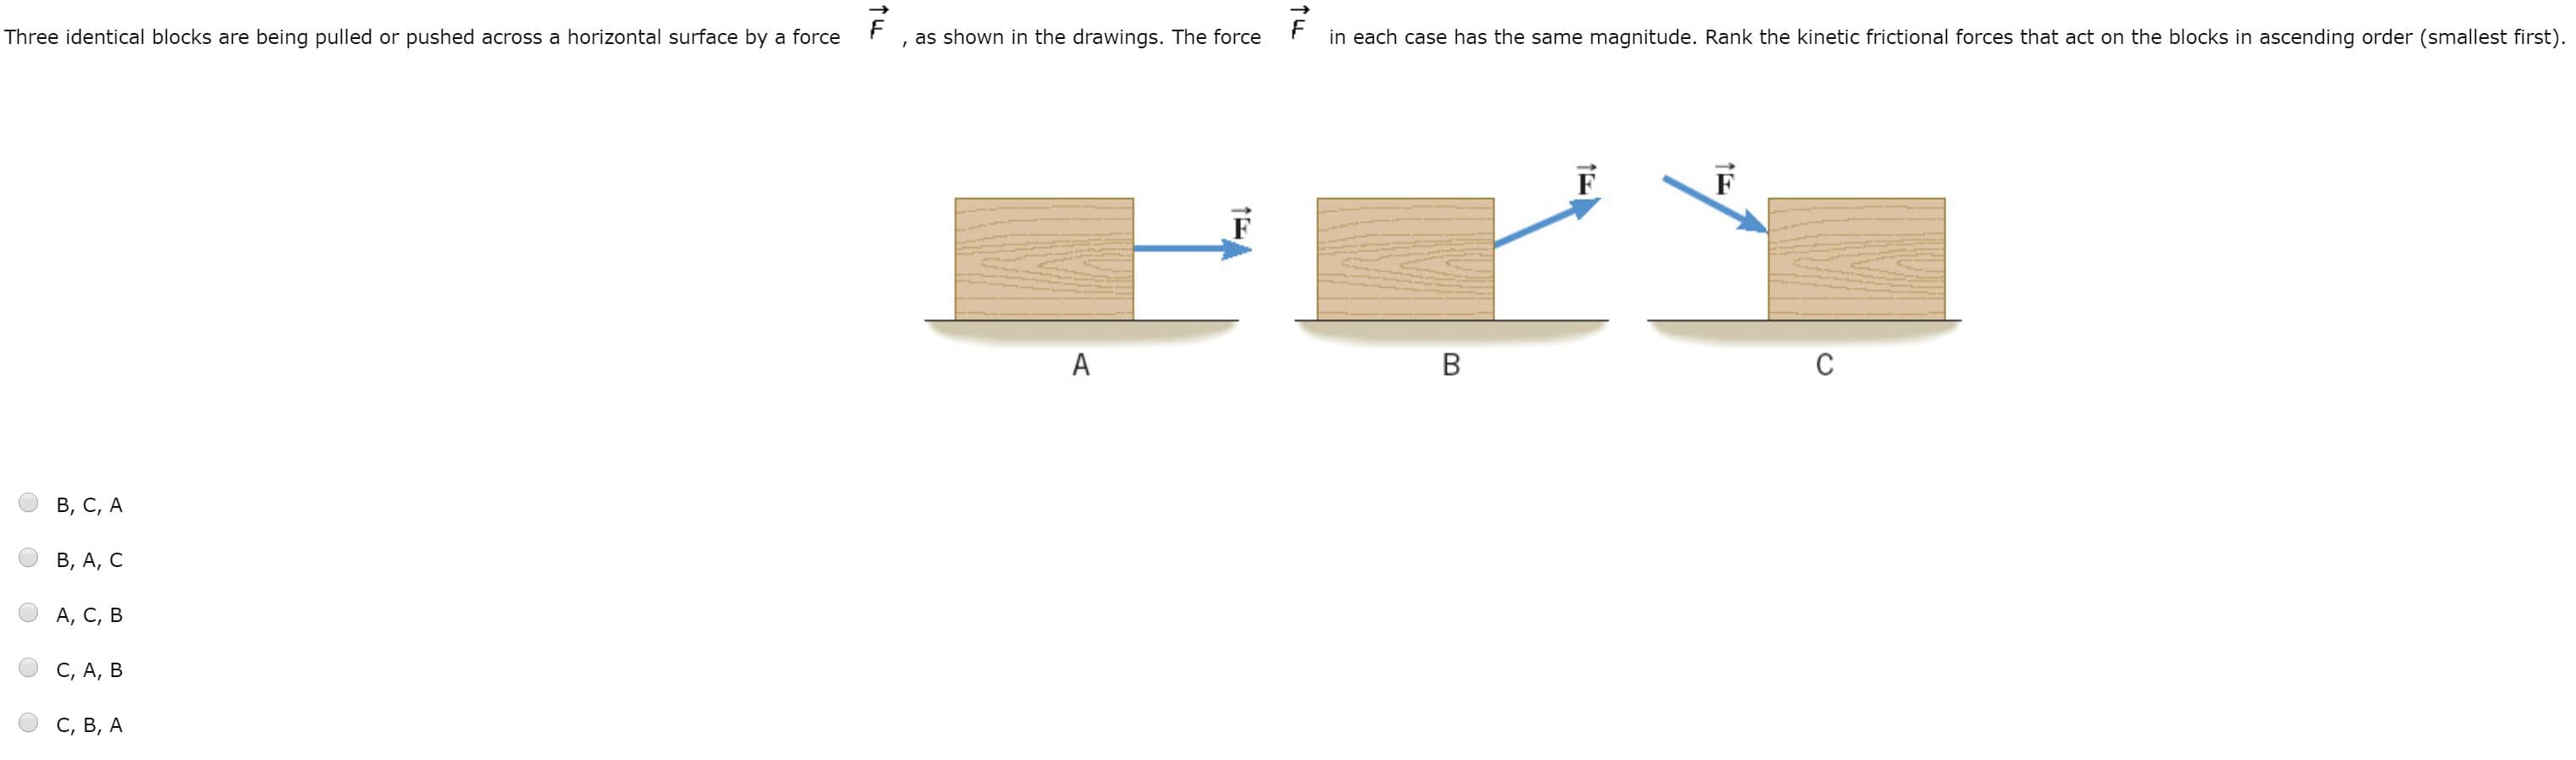 Three identical blocks are being pulled or pushed across a horizontal surface by a force
as shown in the drawings. The force
in each case has the same magnitude. Rank the kinetic frictional forces that act on the blocks in ascending order (smallest first).
